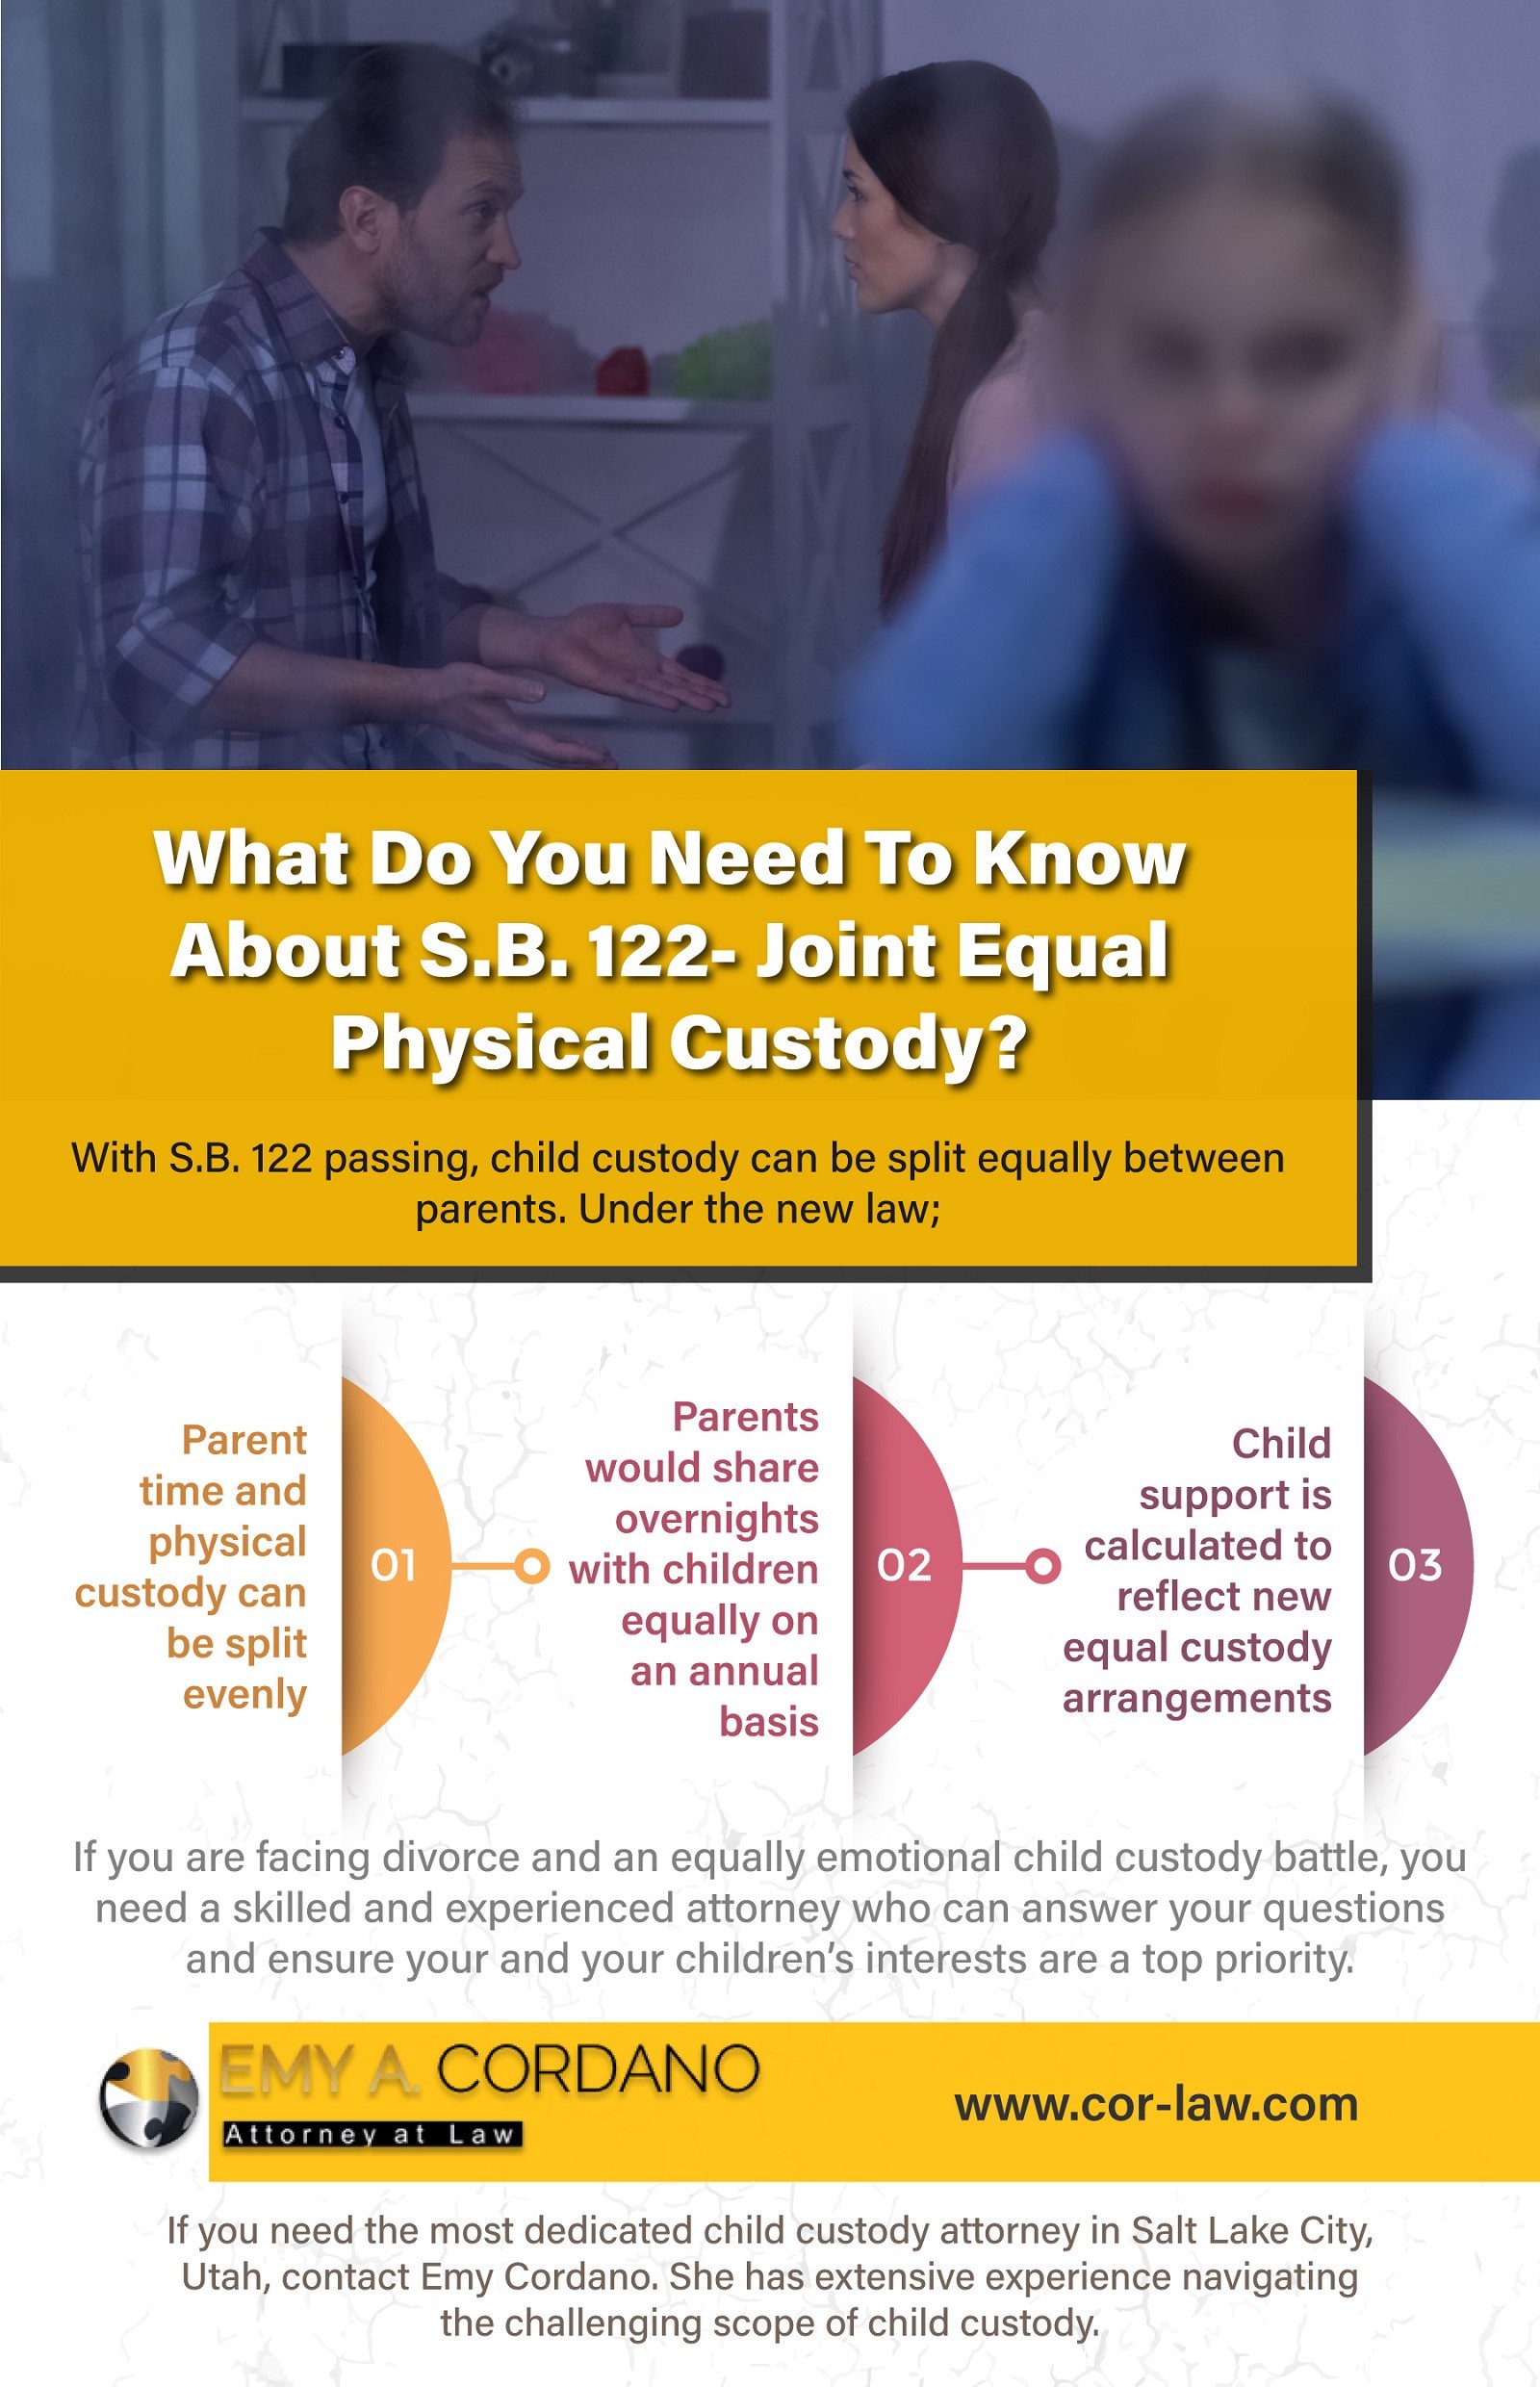 What Is S.B. 122- Joint Equal Physical Custody?